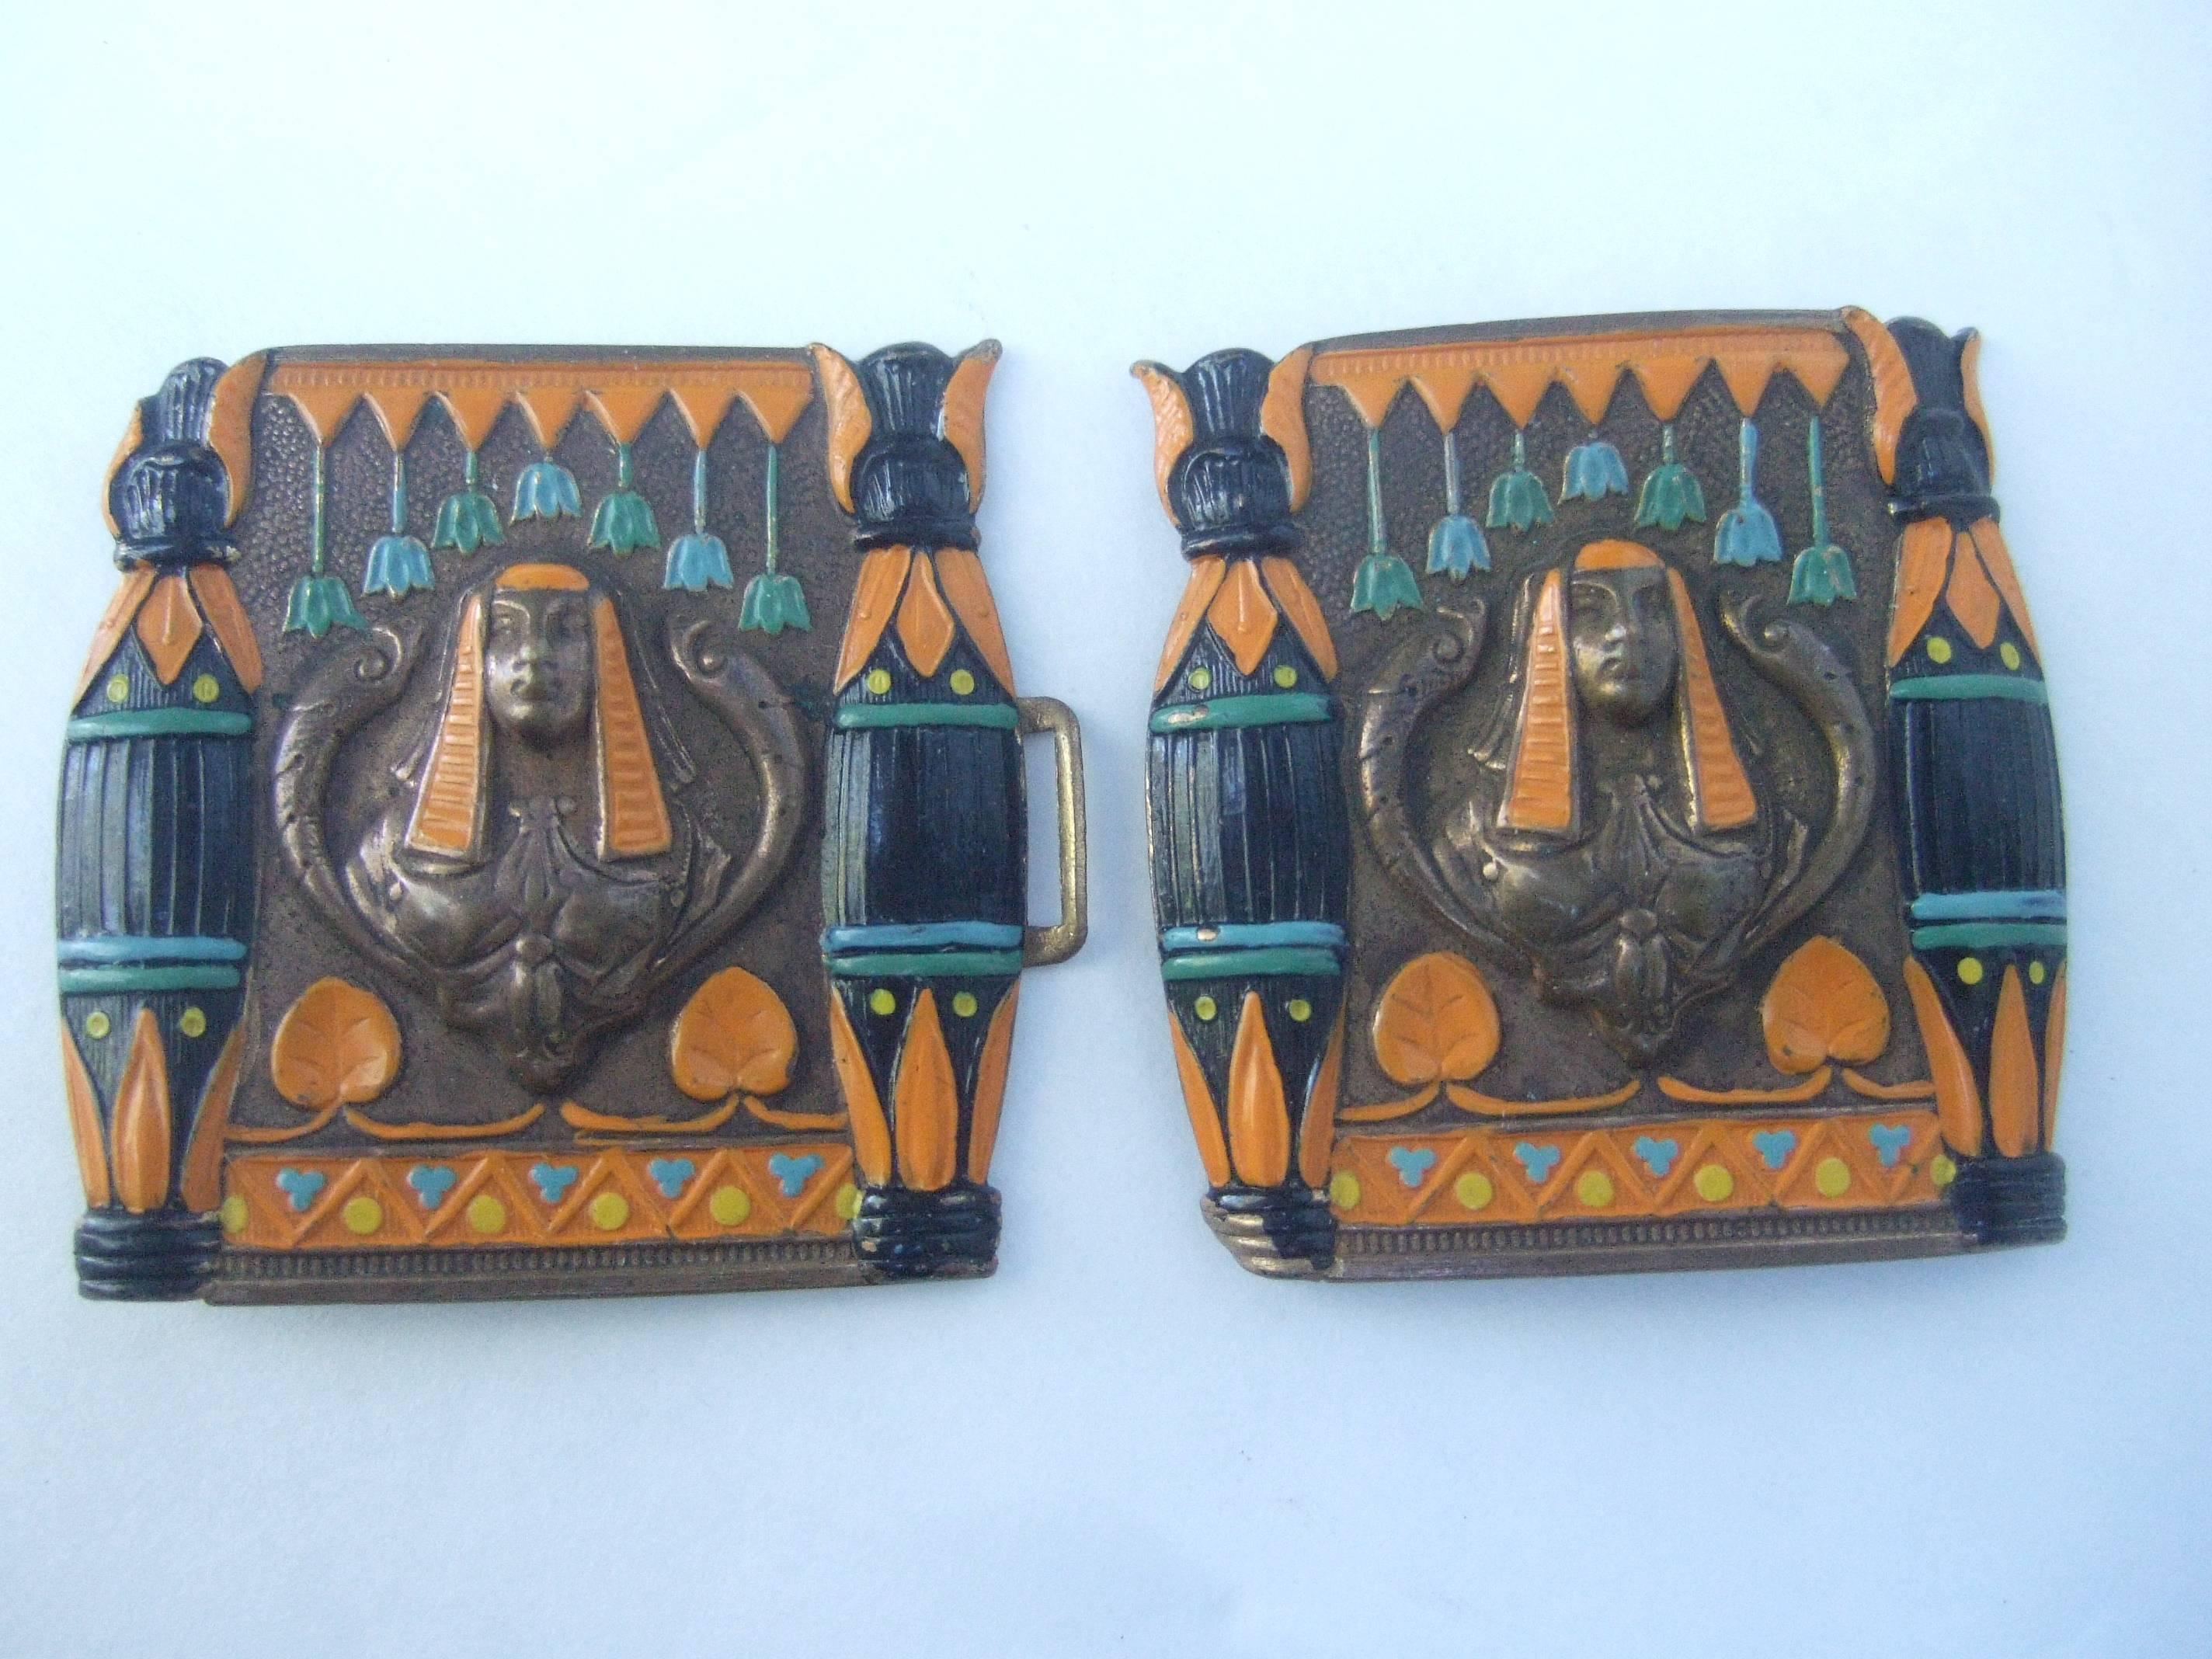 Egyptian revival enamel Pharaoh belt buckles
The unique pair of metal buckles are designed 
with repousse Pharaoh figures at the center;
surrounded by coiled snakes on each side
of their heads

The burnished copper metal buckles are
accented